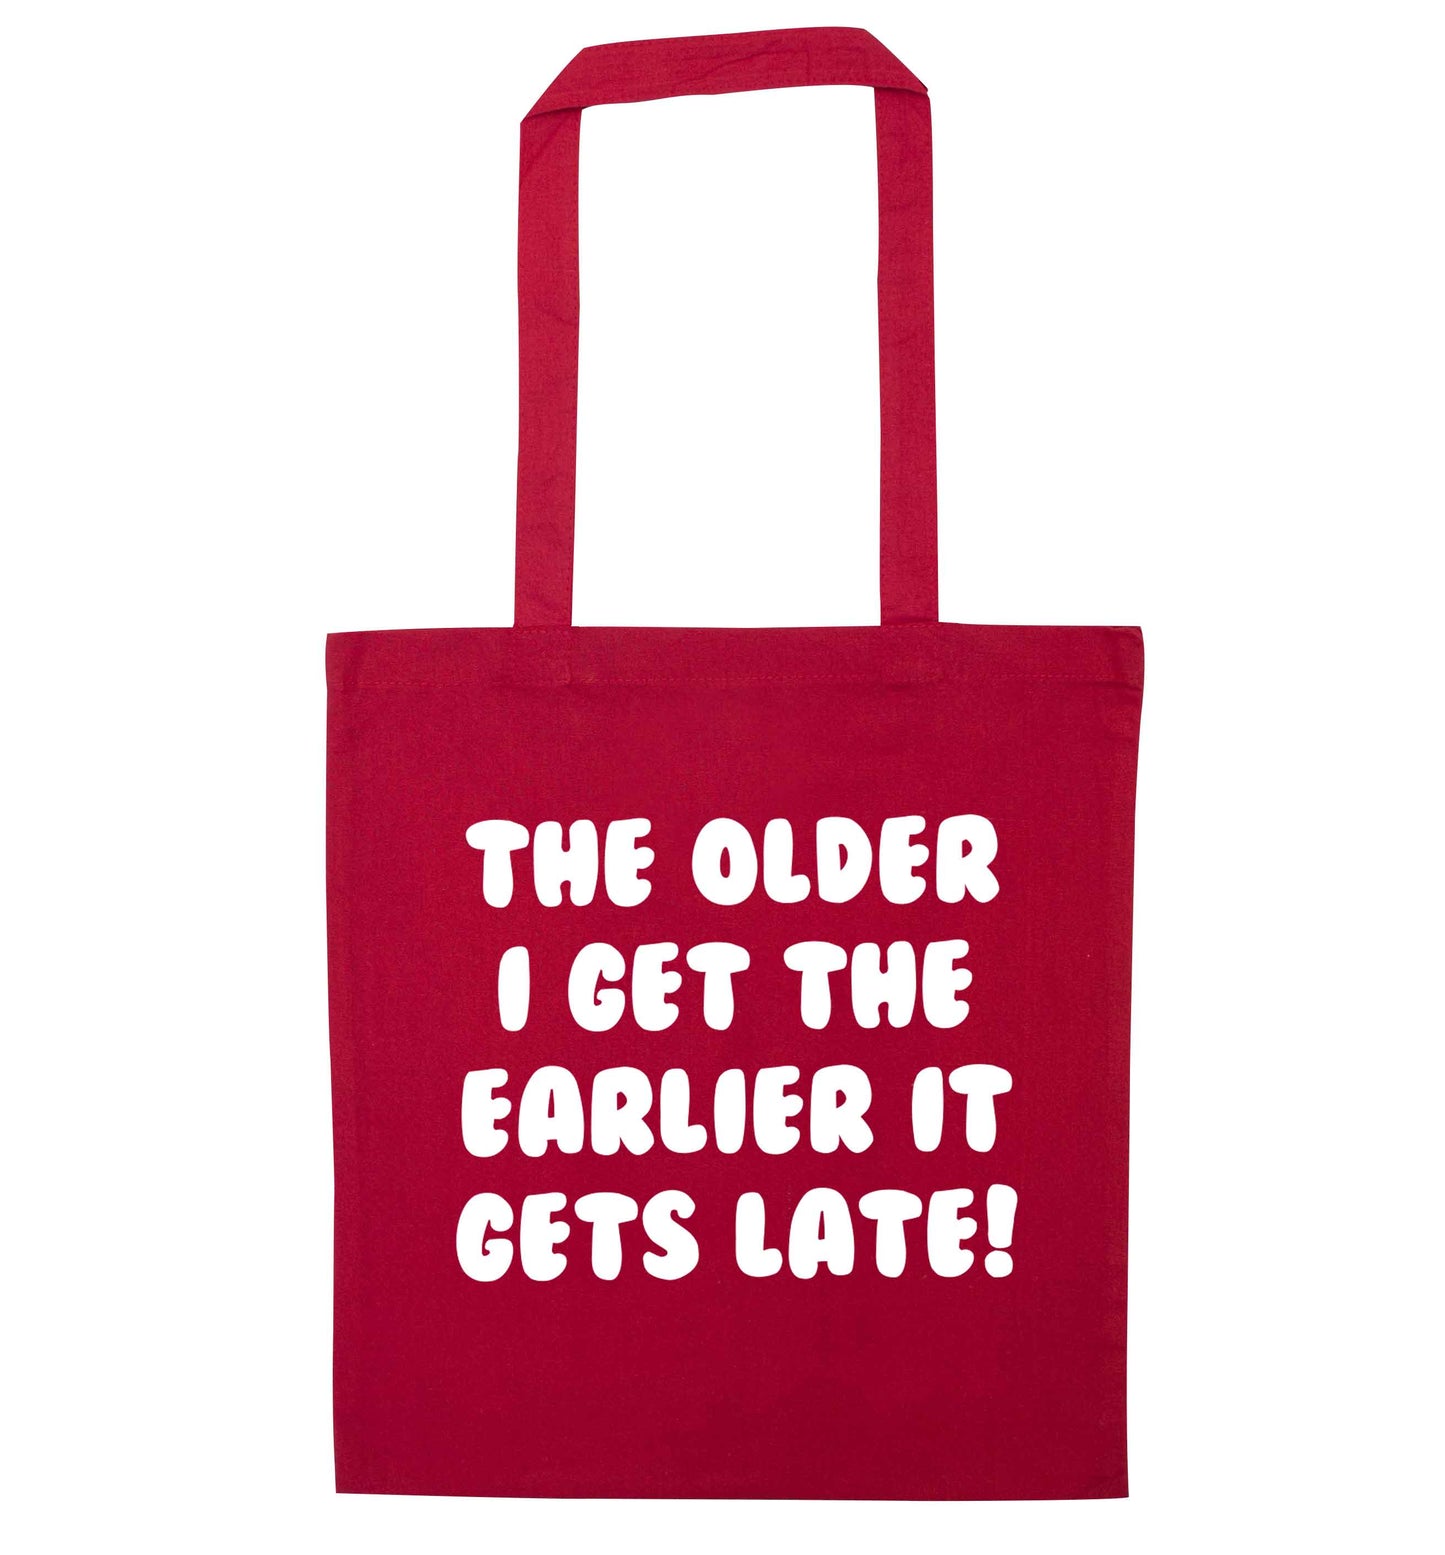 The older I get the earlier it gets late! red tote bag